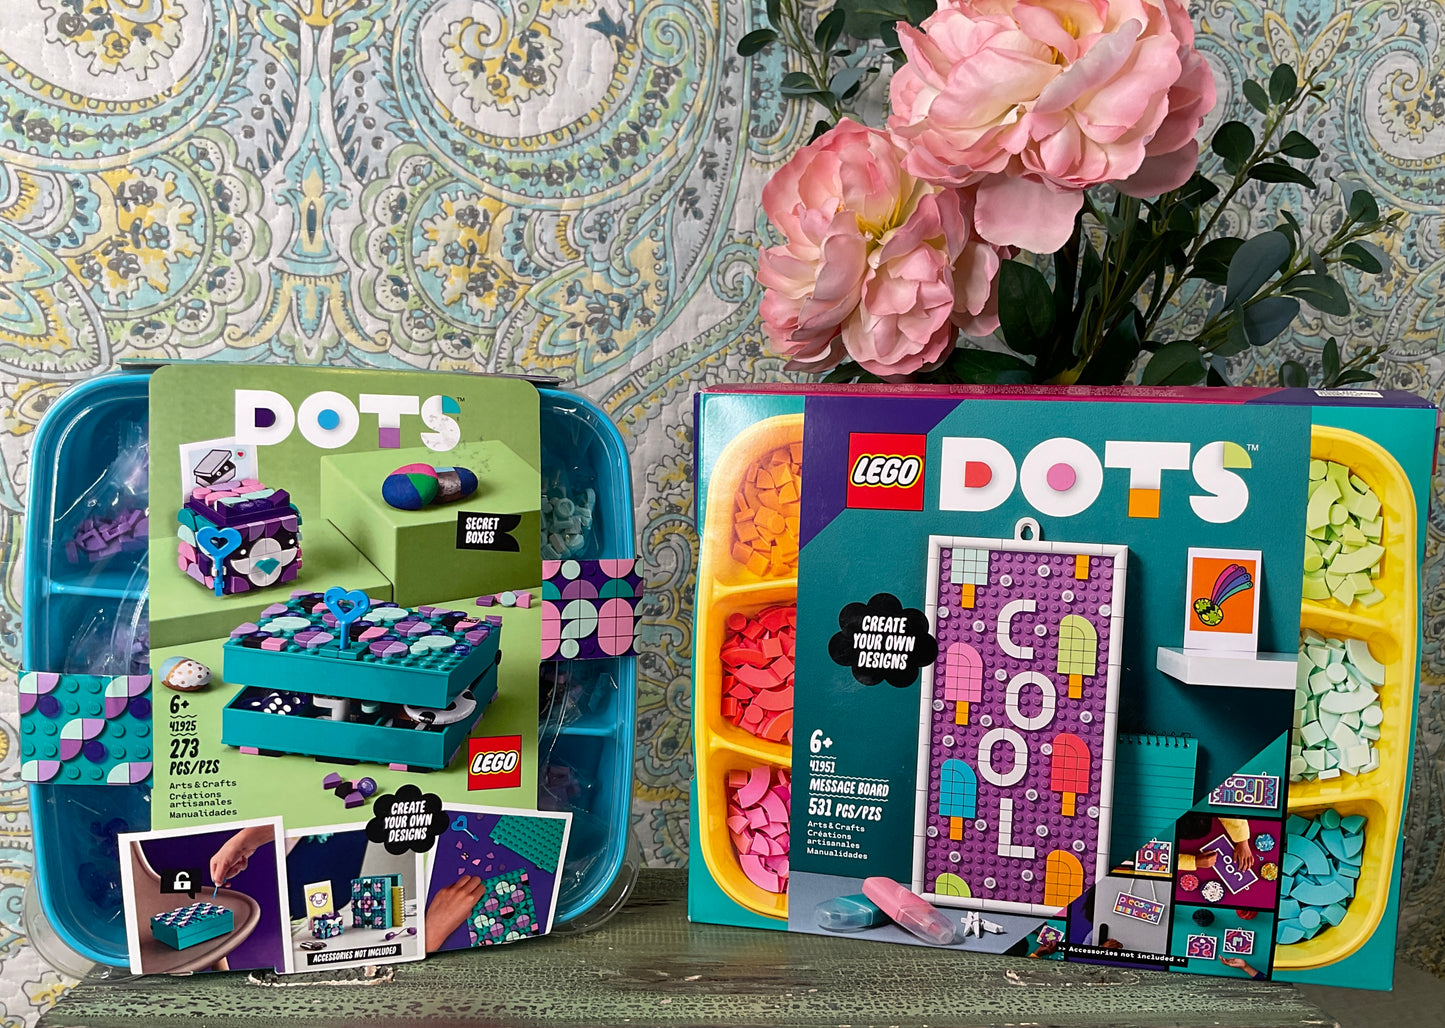 Lego Dots Message Board & Secret Boxes, Sold Separately